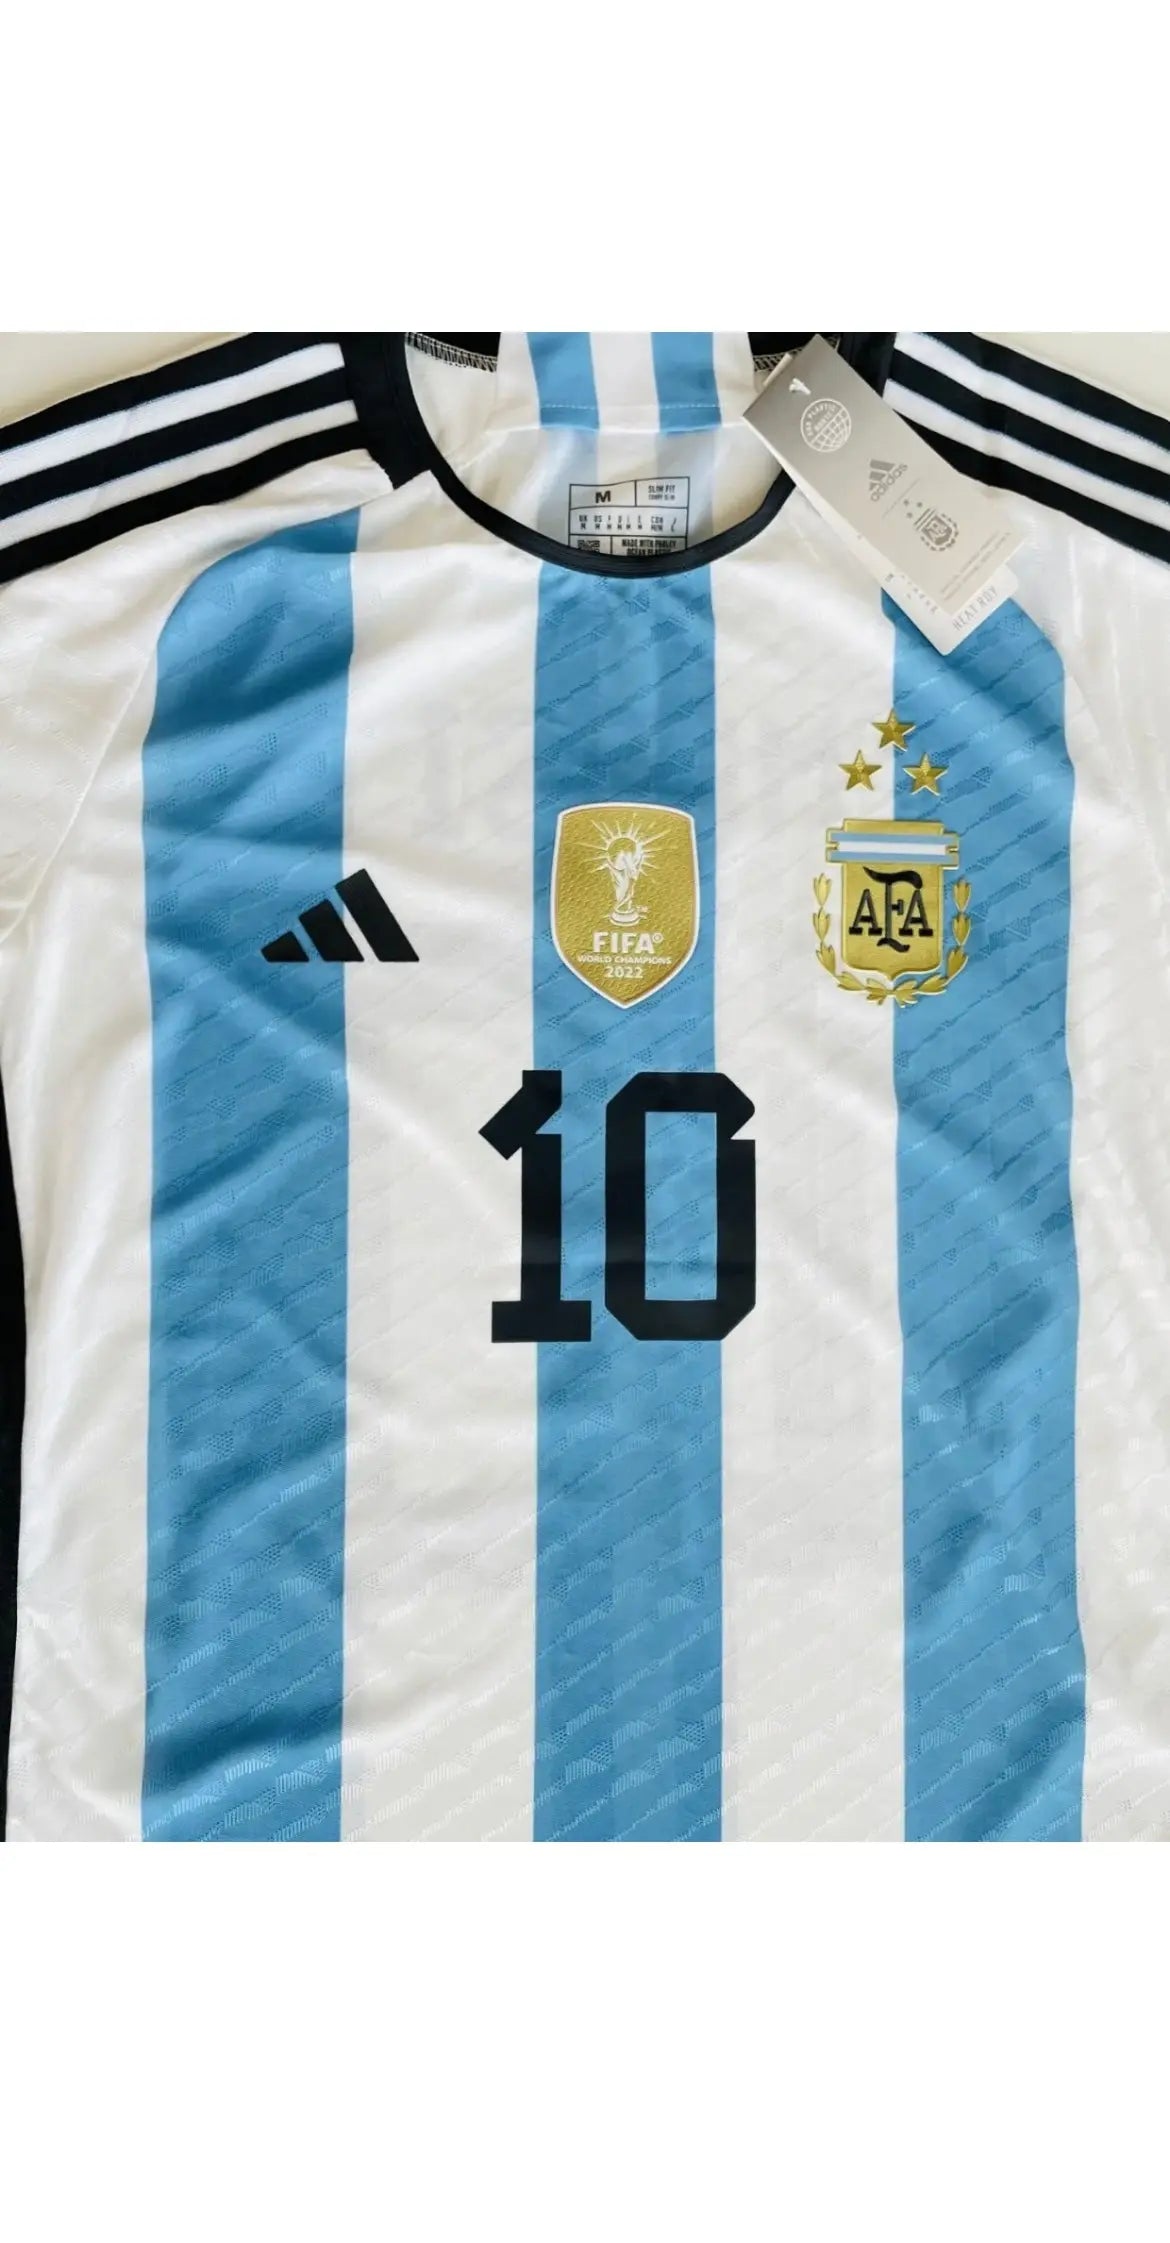 Lionel Messi Argentina National Team Adidas 2022 World Cup Player Jersey - White/Light Blue